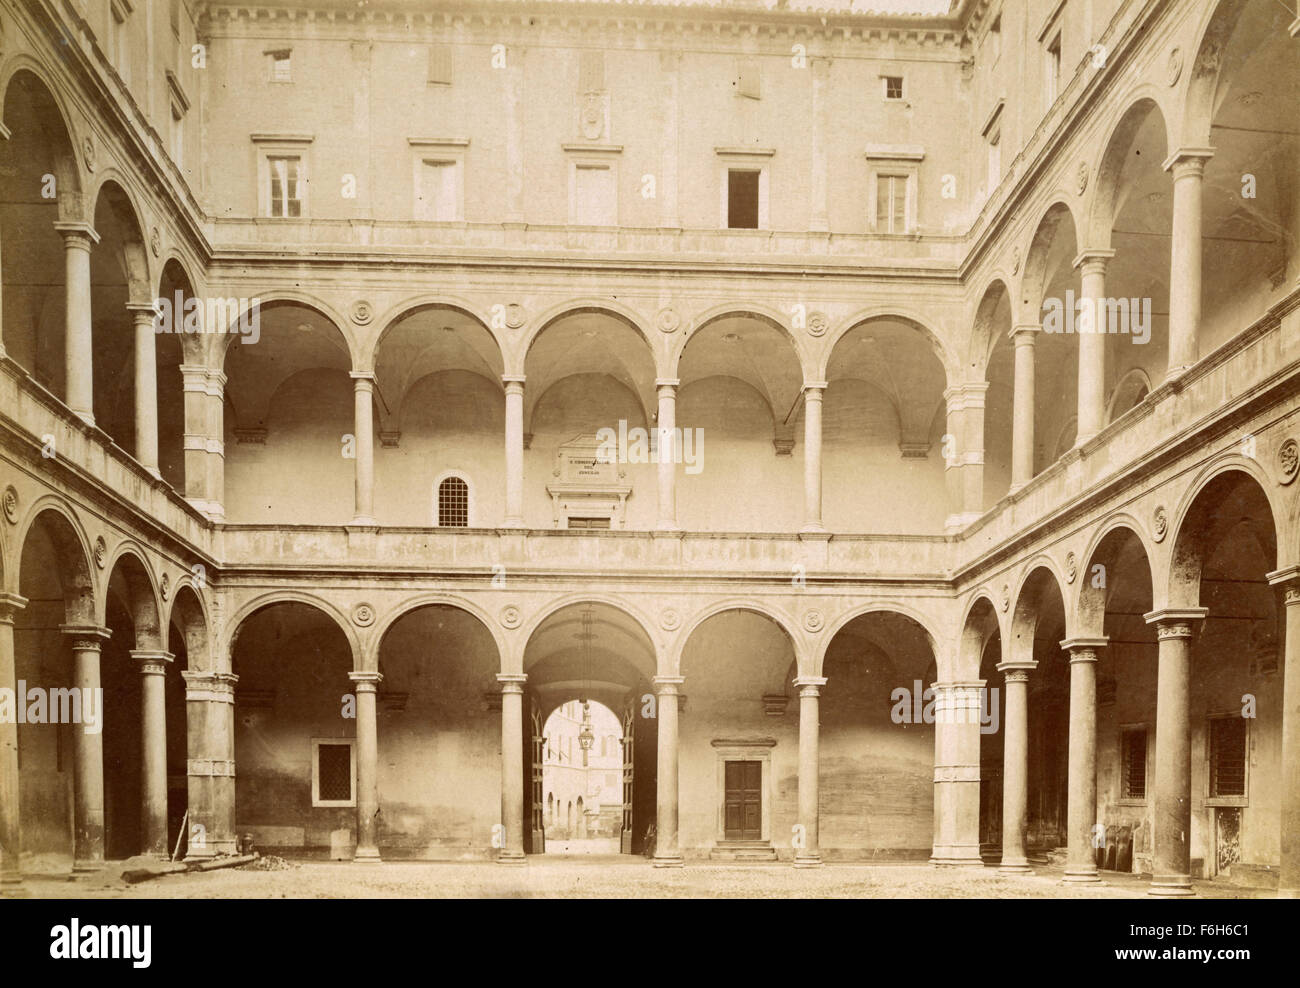 Inside the Chancellery Palace, Rome, Italy Stock Photo